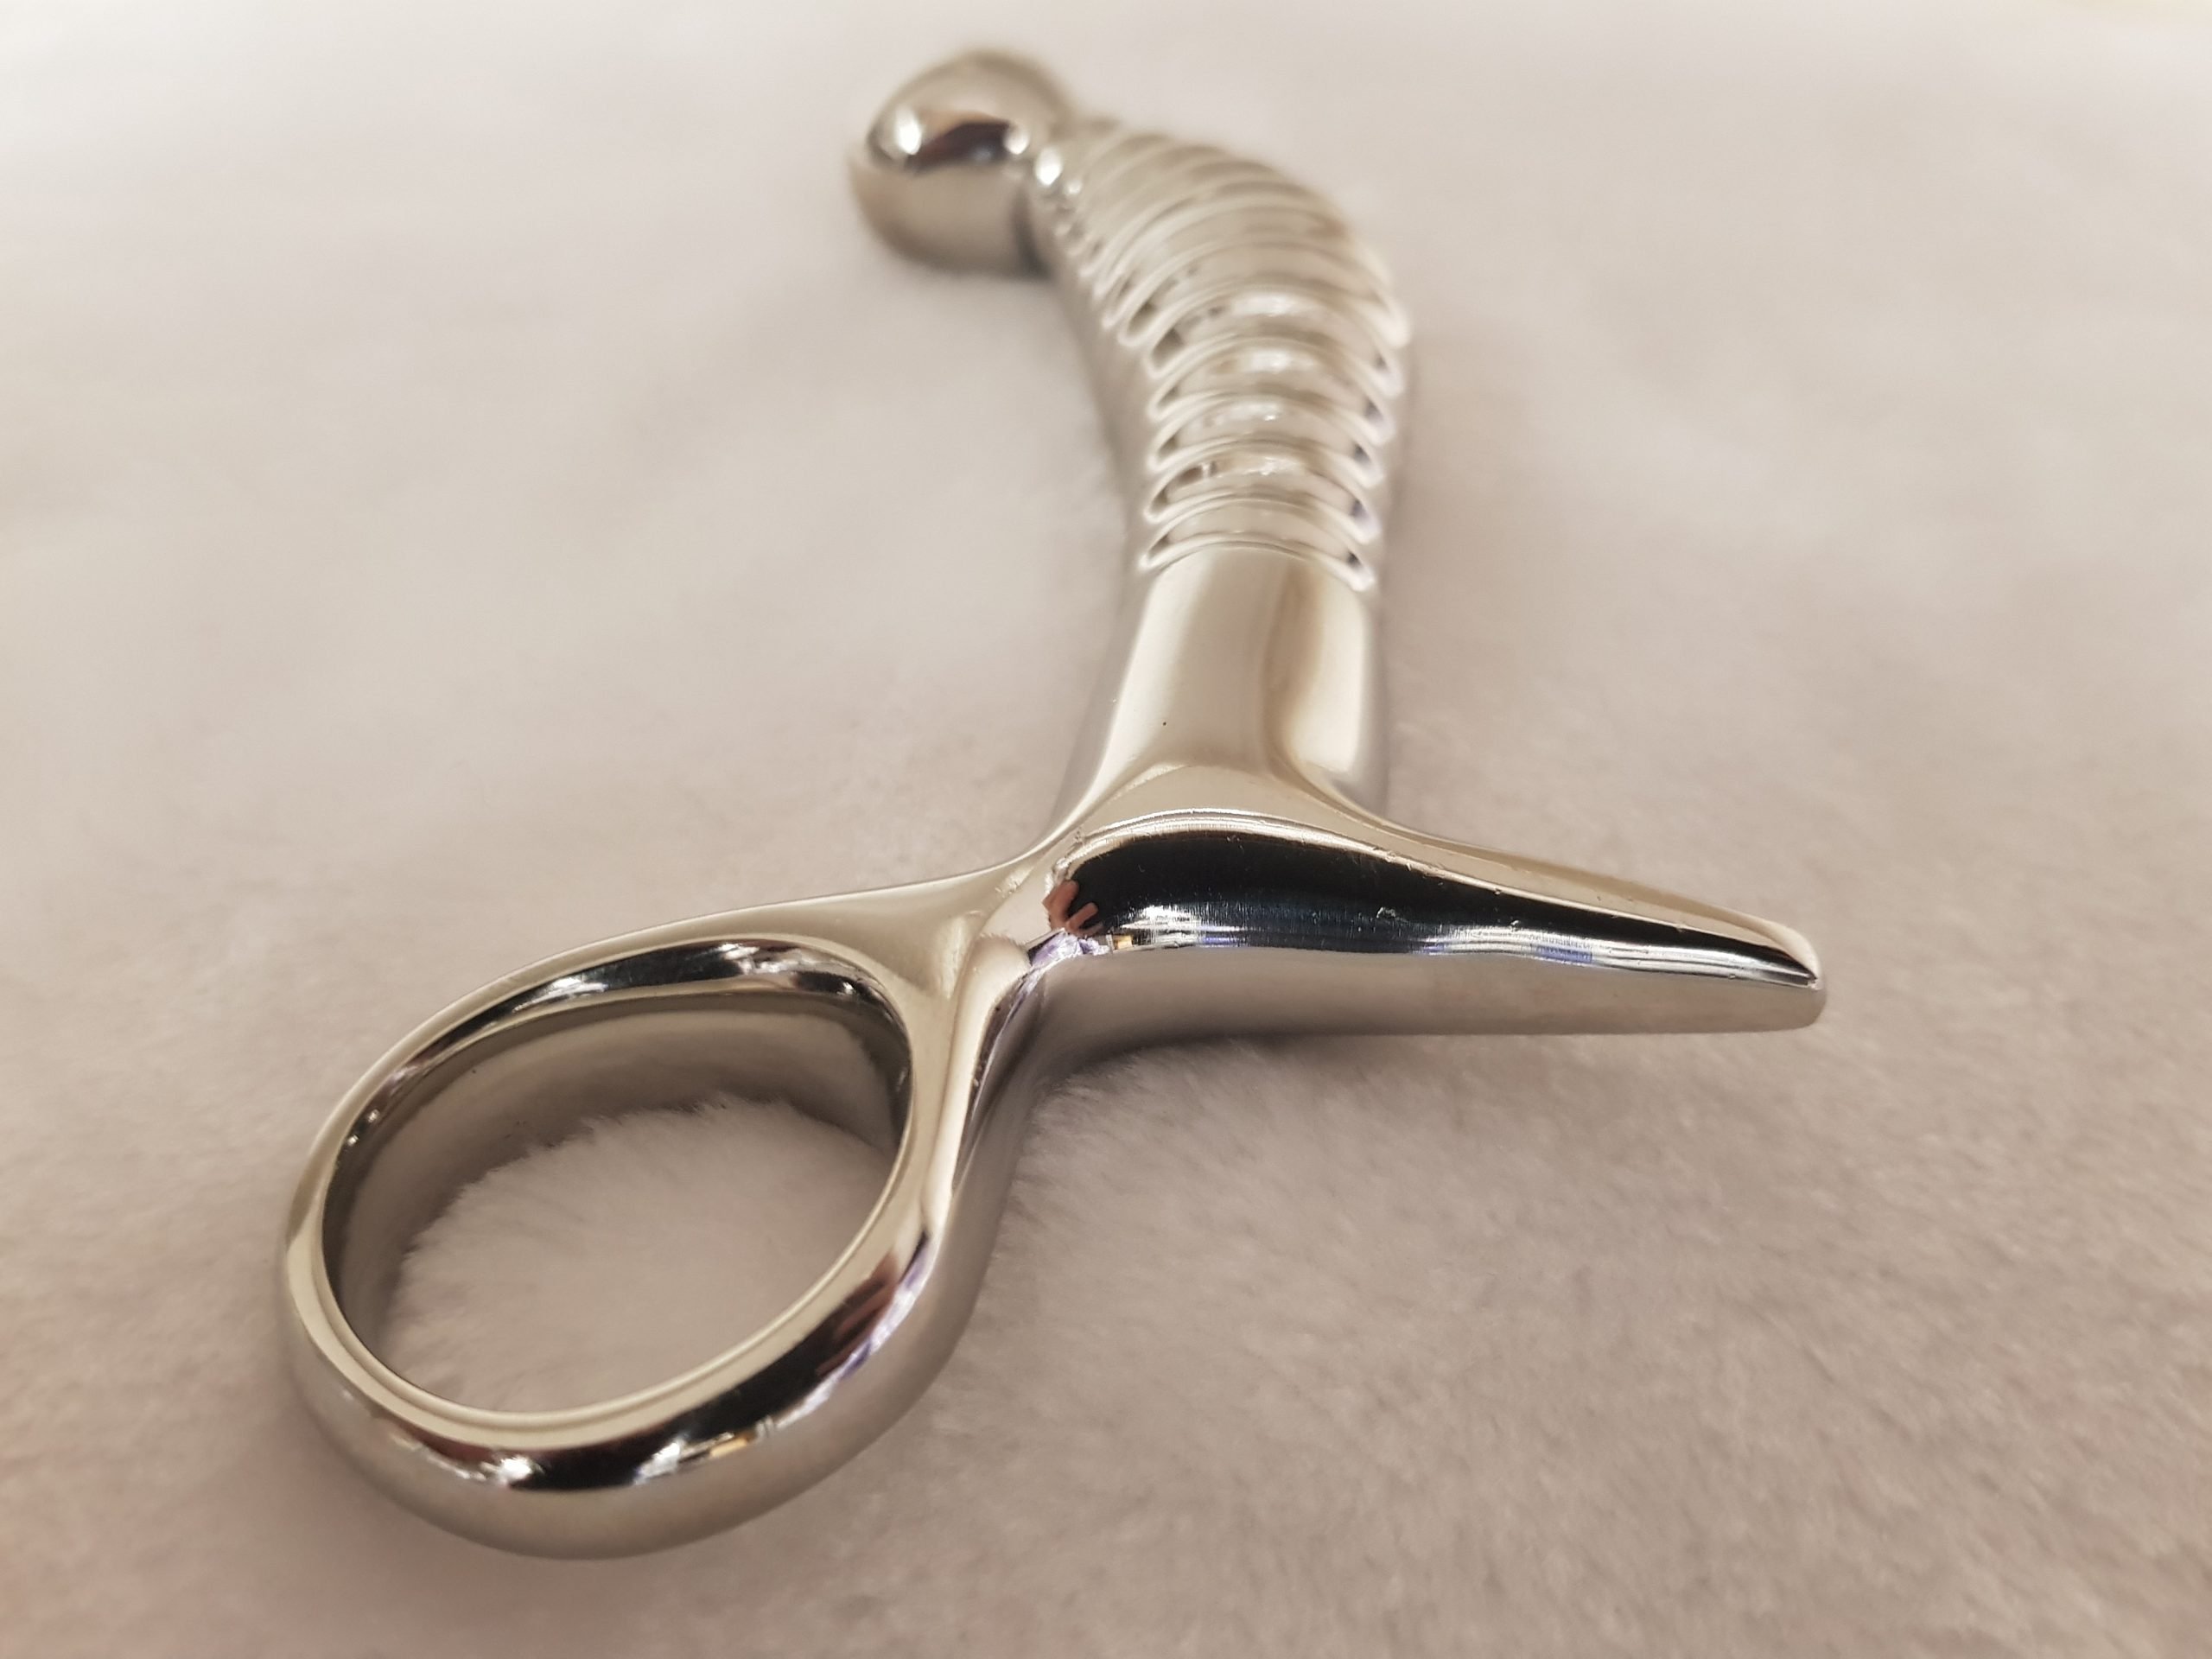 Stainless Steel Prostate Massager with threaded handle ...